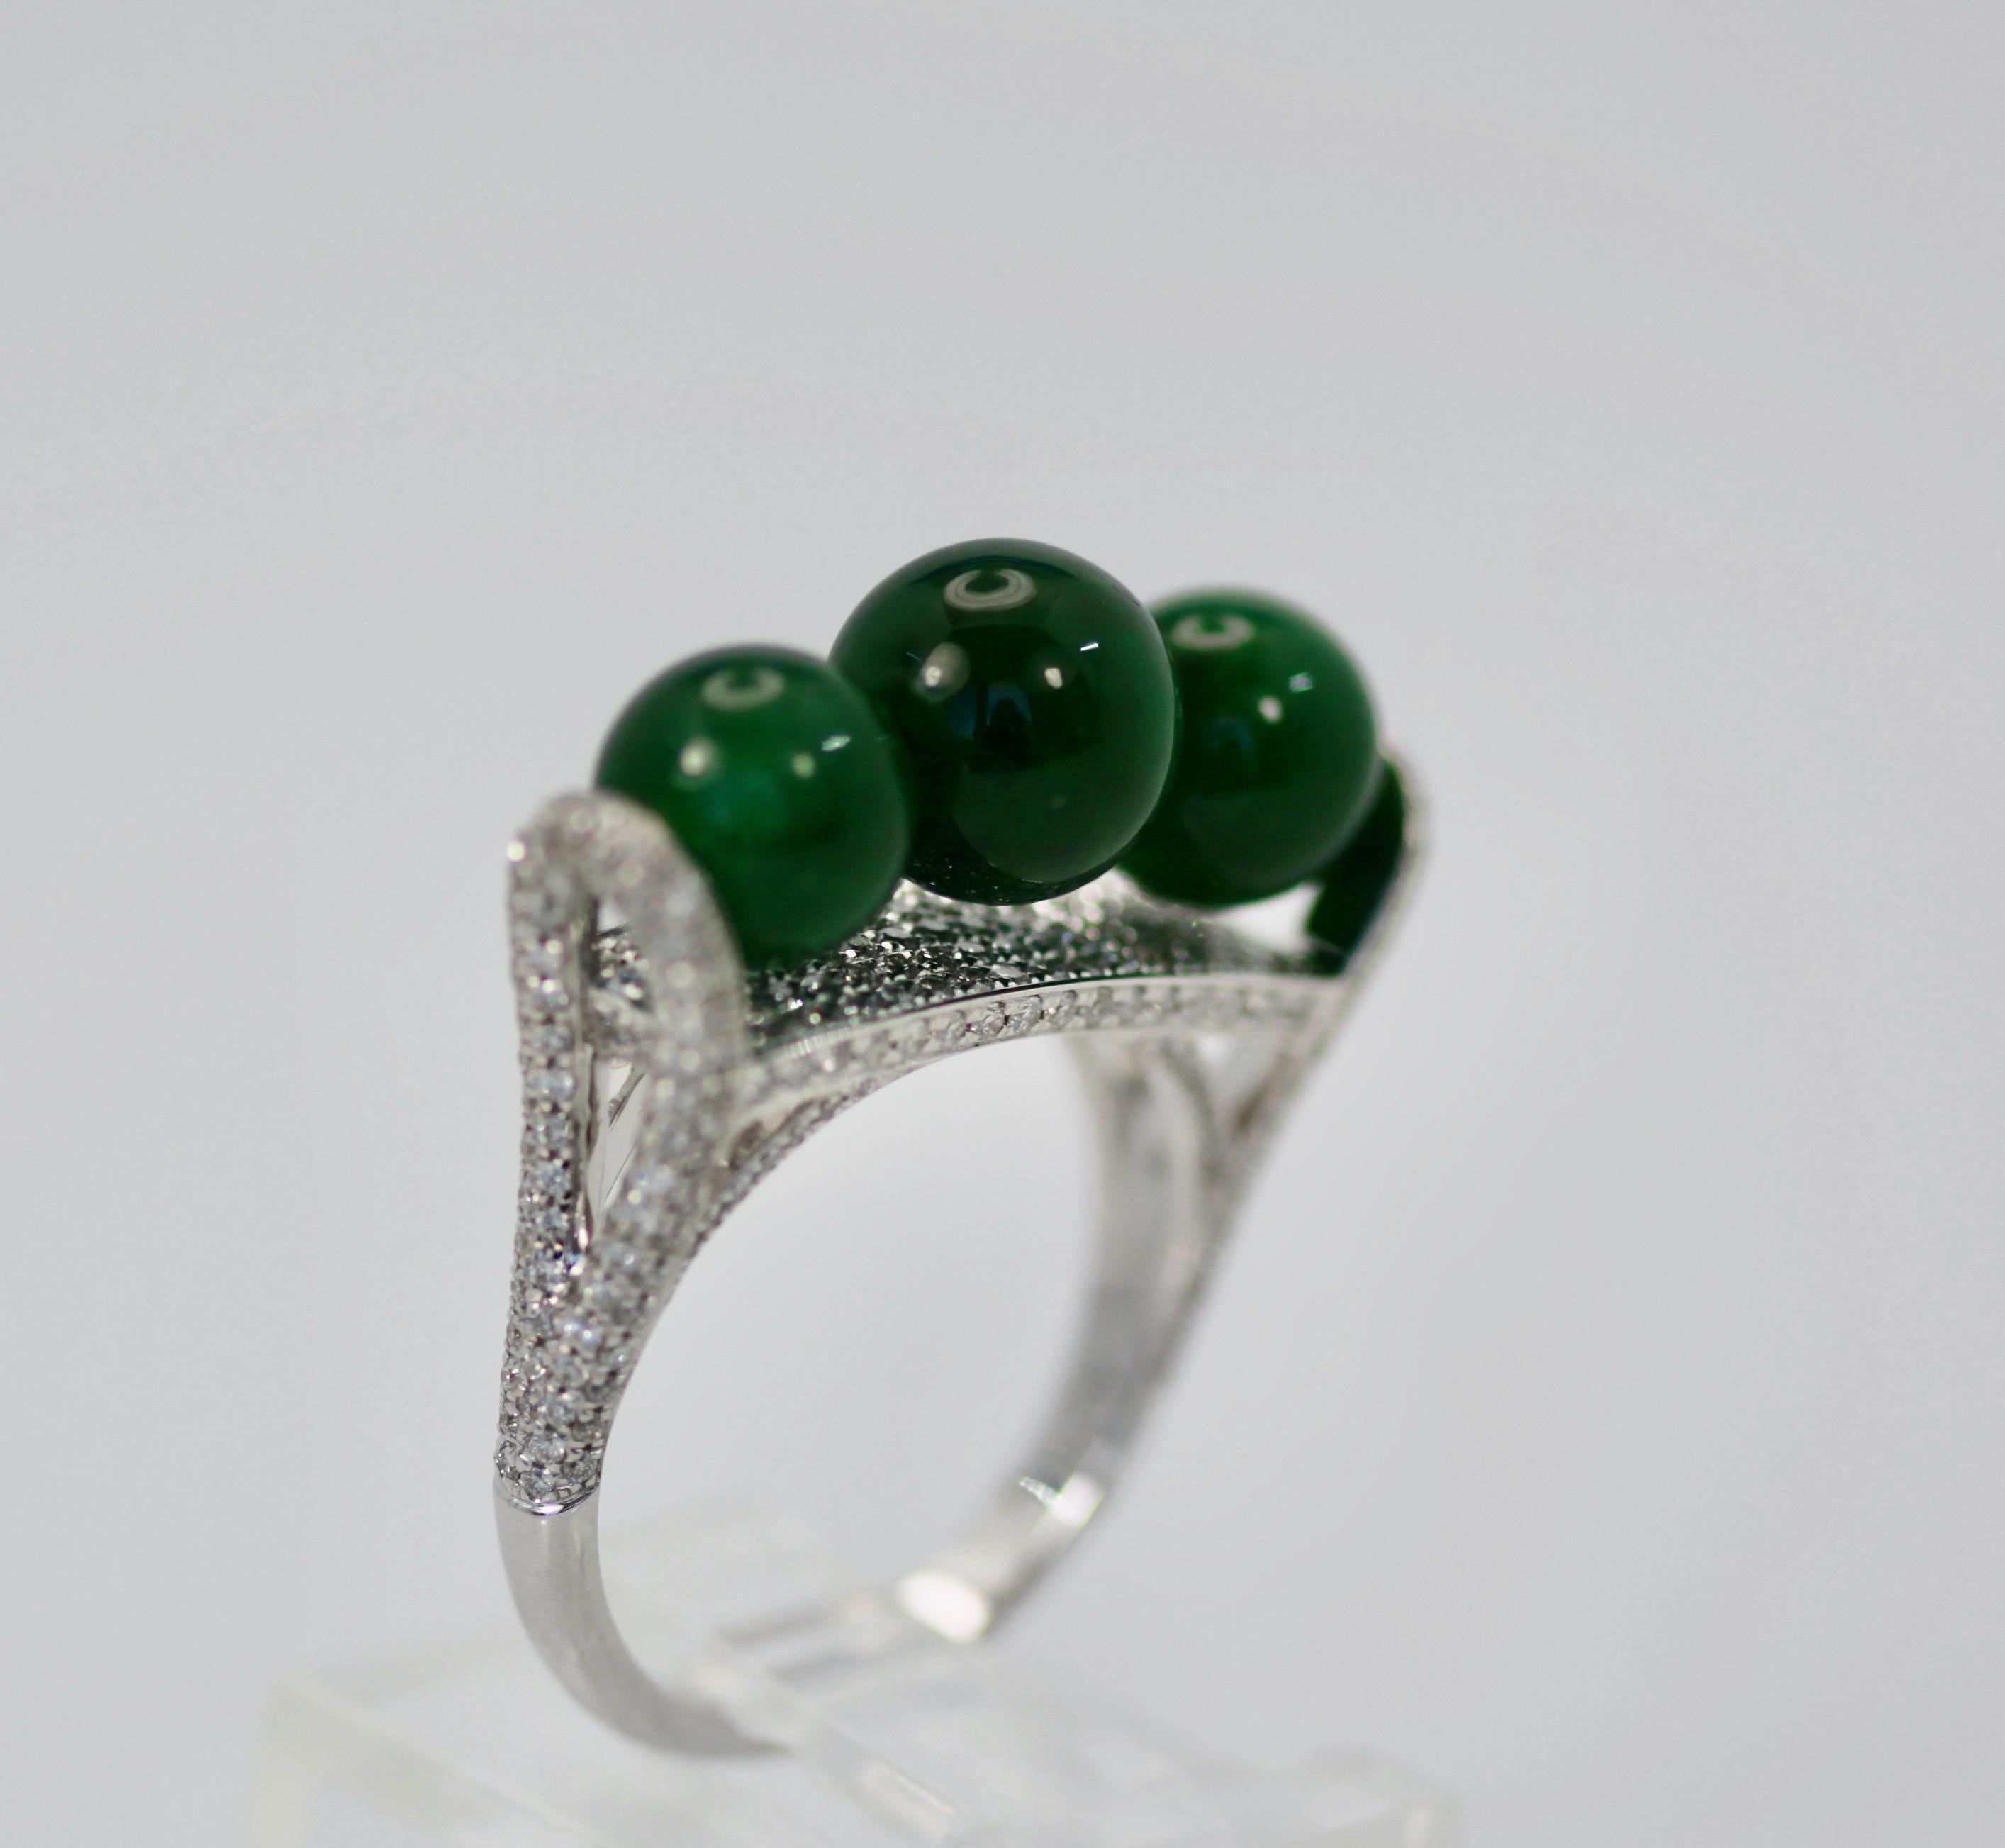 This gorgeous ring comes out of a Sotheby's Fine Jadeite and Jade auction in Hong Kong.  It consists of three (3) Jadeite Beads 7.75 round on a Diamond surround and base.  This ring is Jadeite, not Jade or Nephrite bit real Jadeite. These Beads glow